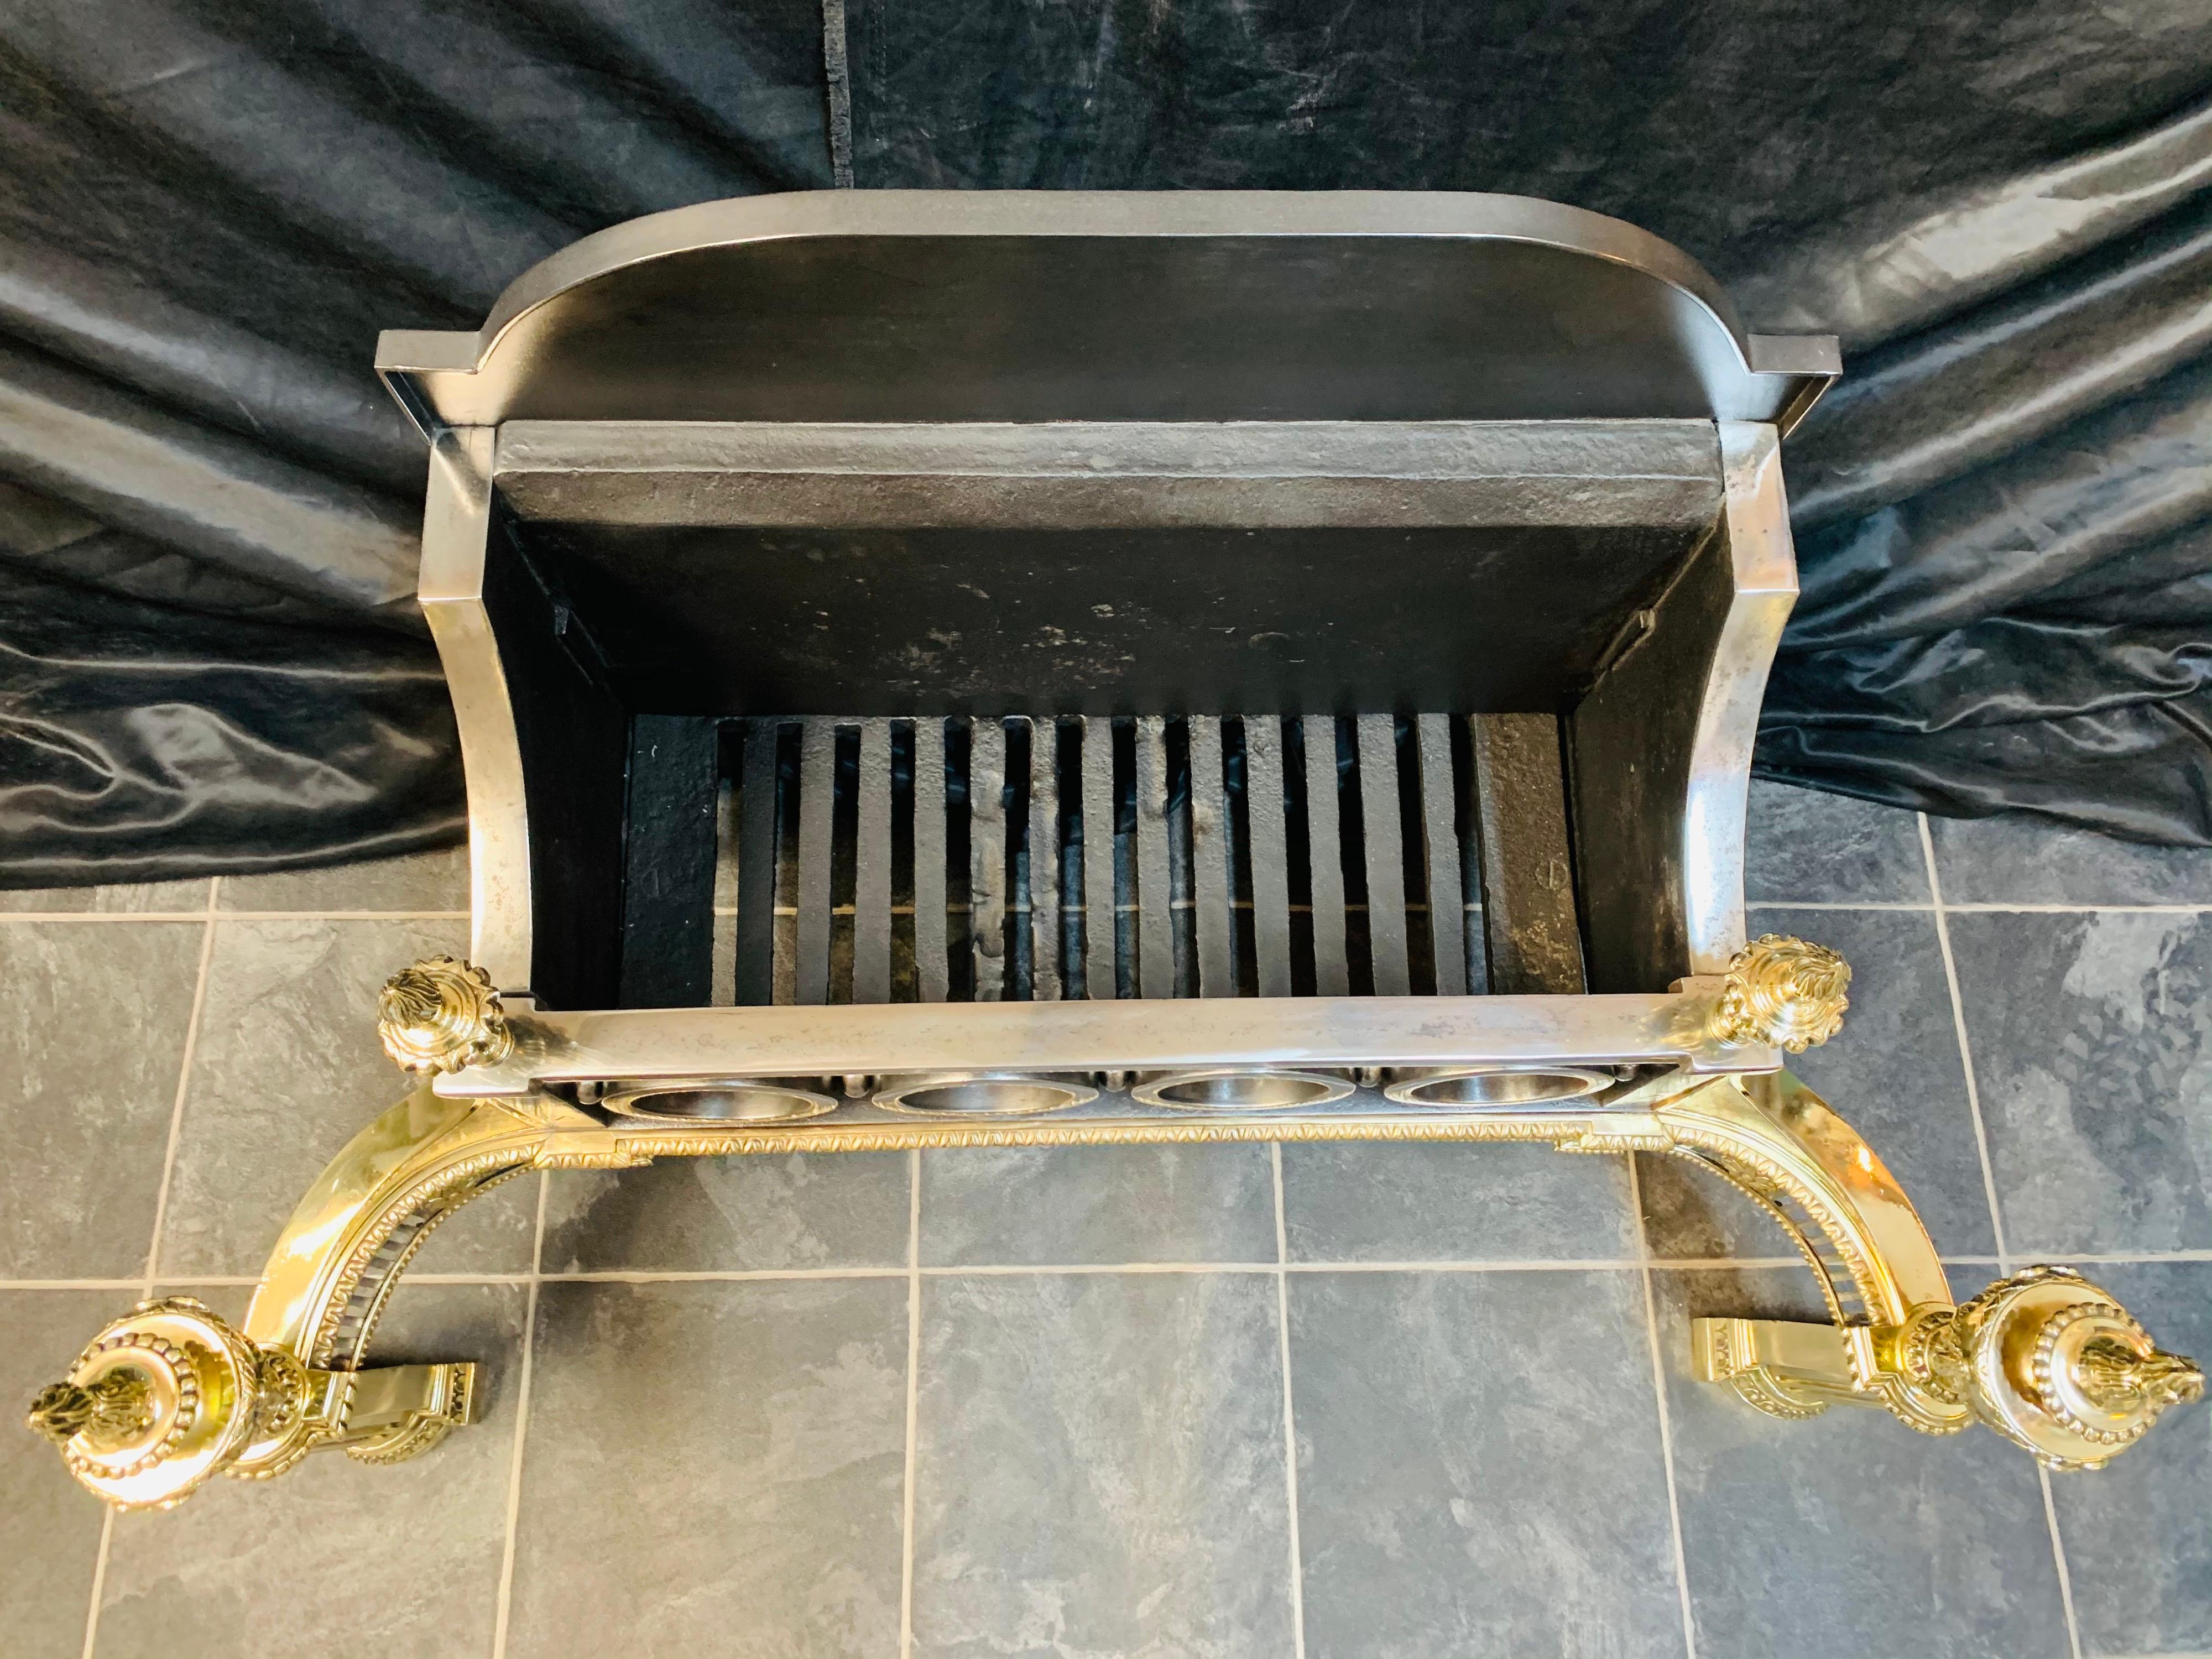 Substantial Early 19th Century Regency Brass and Steel Fire Grate Basket For Sale 6